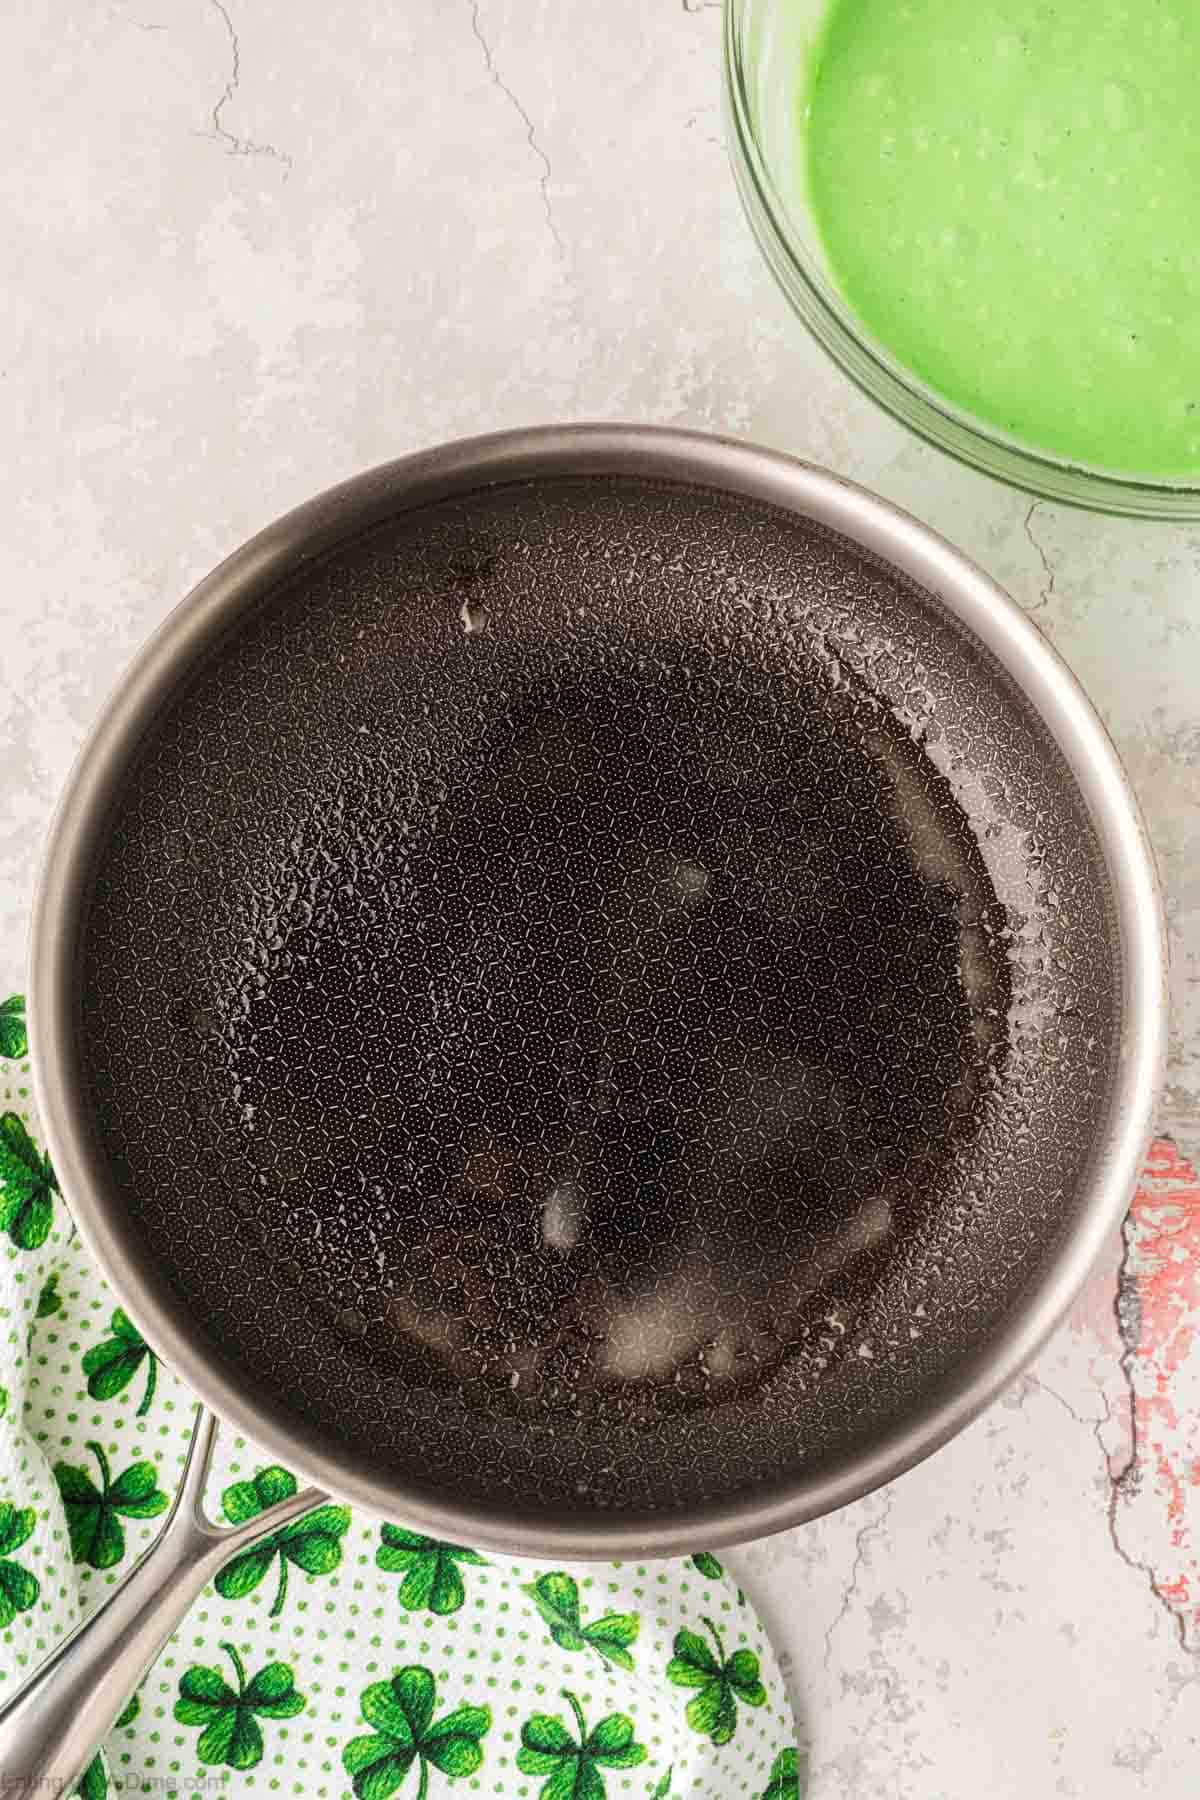 Heating a skillet with butter